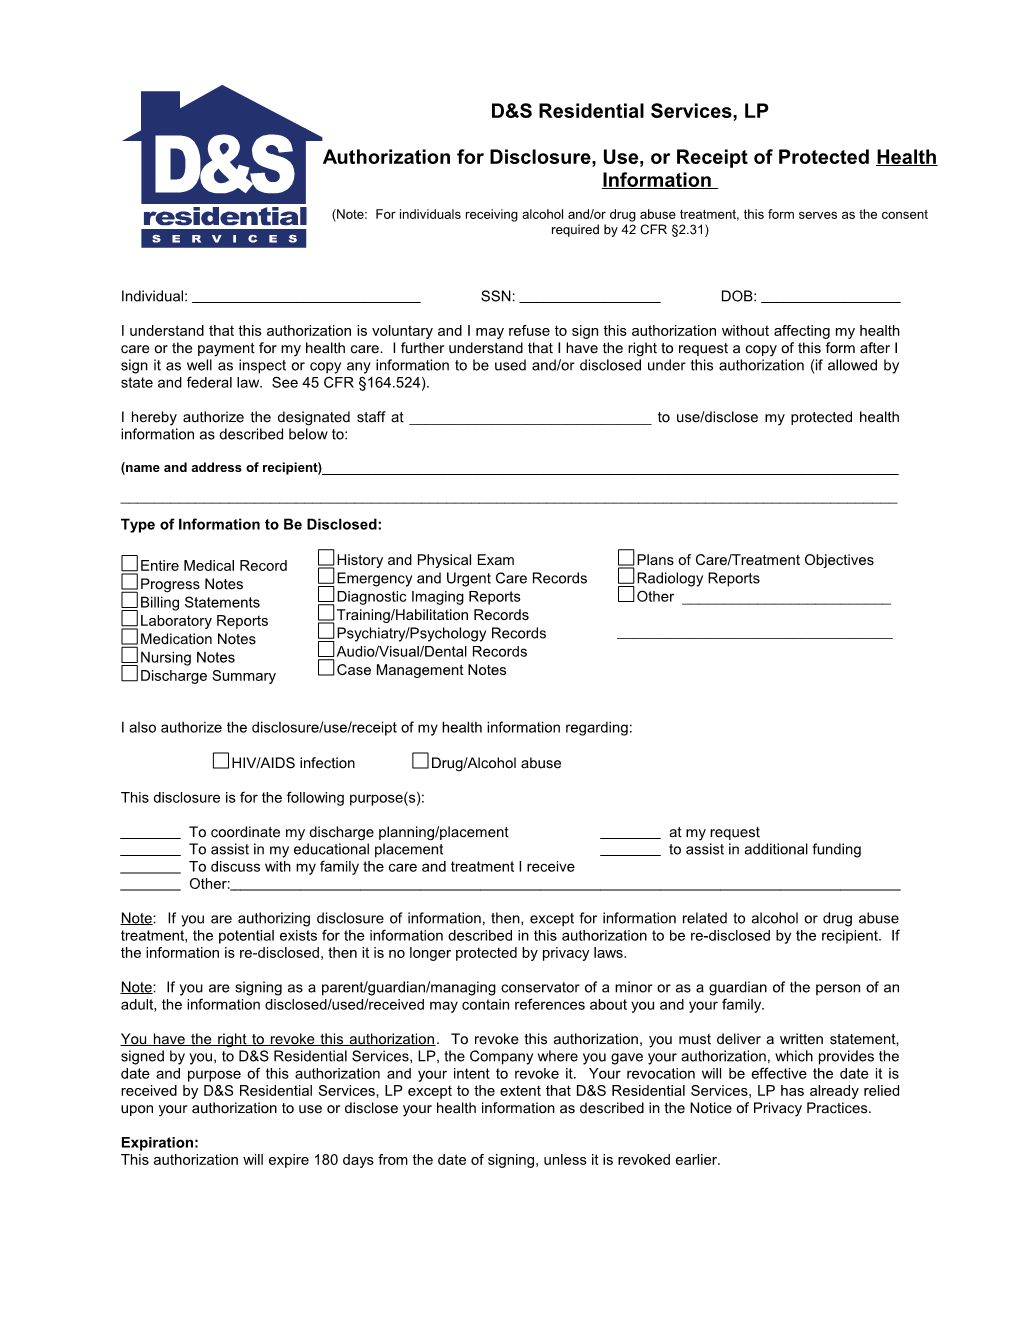 HIPAA Authorization Form Sample-Customize for Your Practice